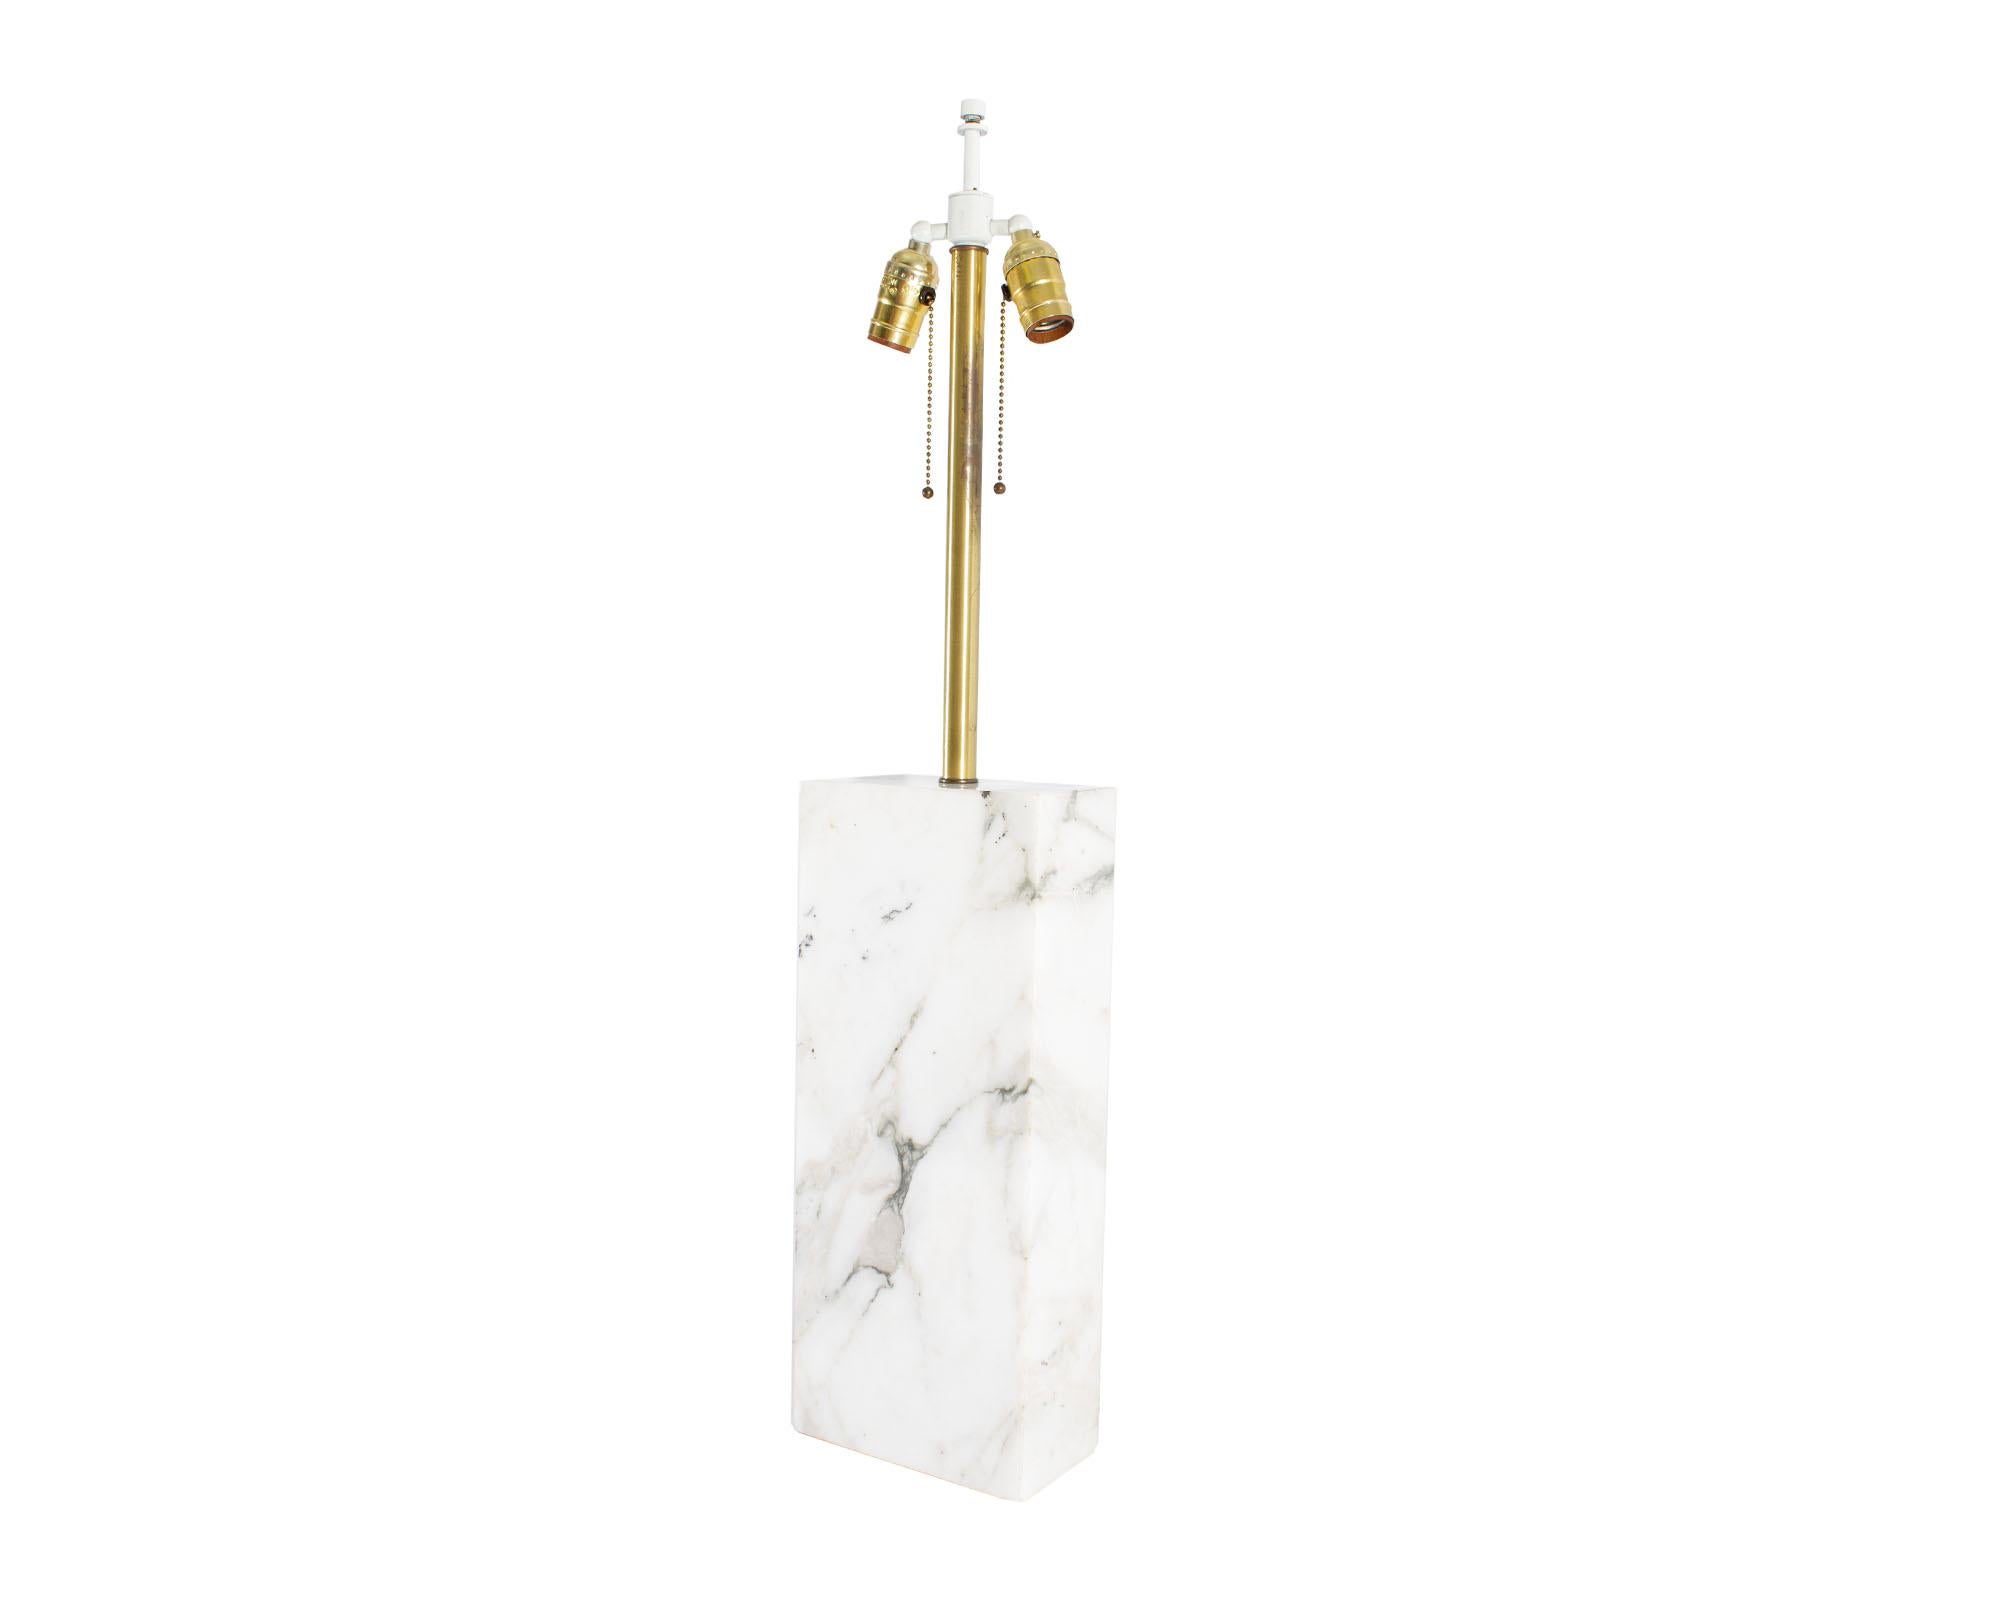 A stone table lamp by the American lighting company Nessen Studios. This dual-bulb design is made of a block of white and gray marbled stone with brass tone and white hardware. Accents include the beaded chains and cream-colored cord. The lamp is